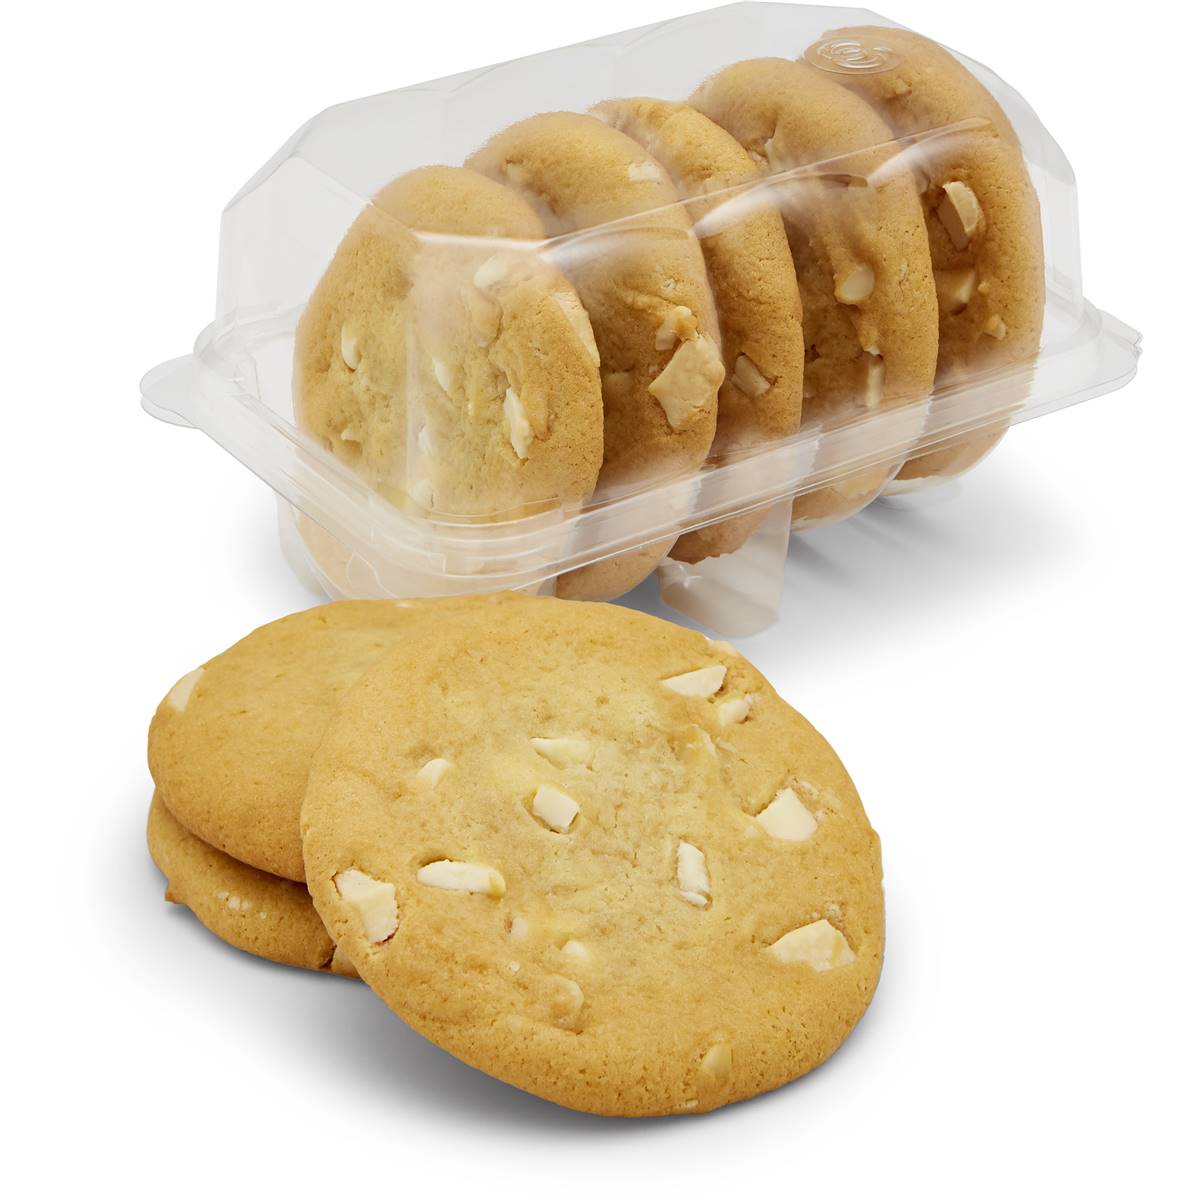 Calories in Woolworths White Chocolate & Macadamia Cookies